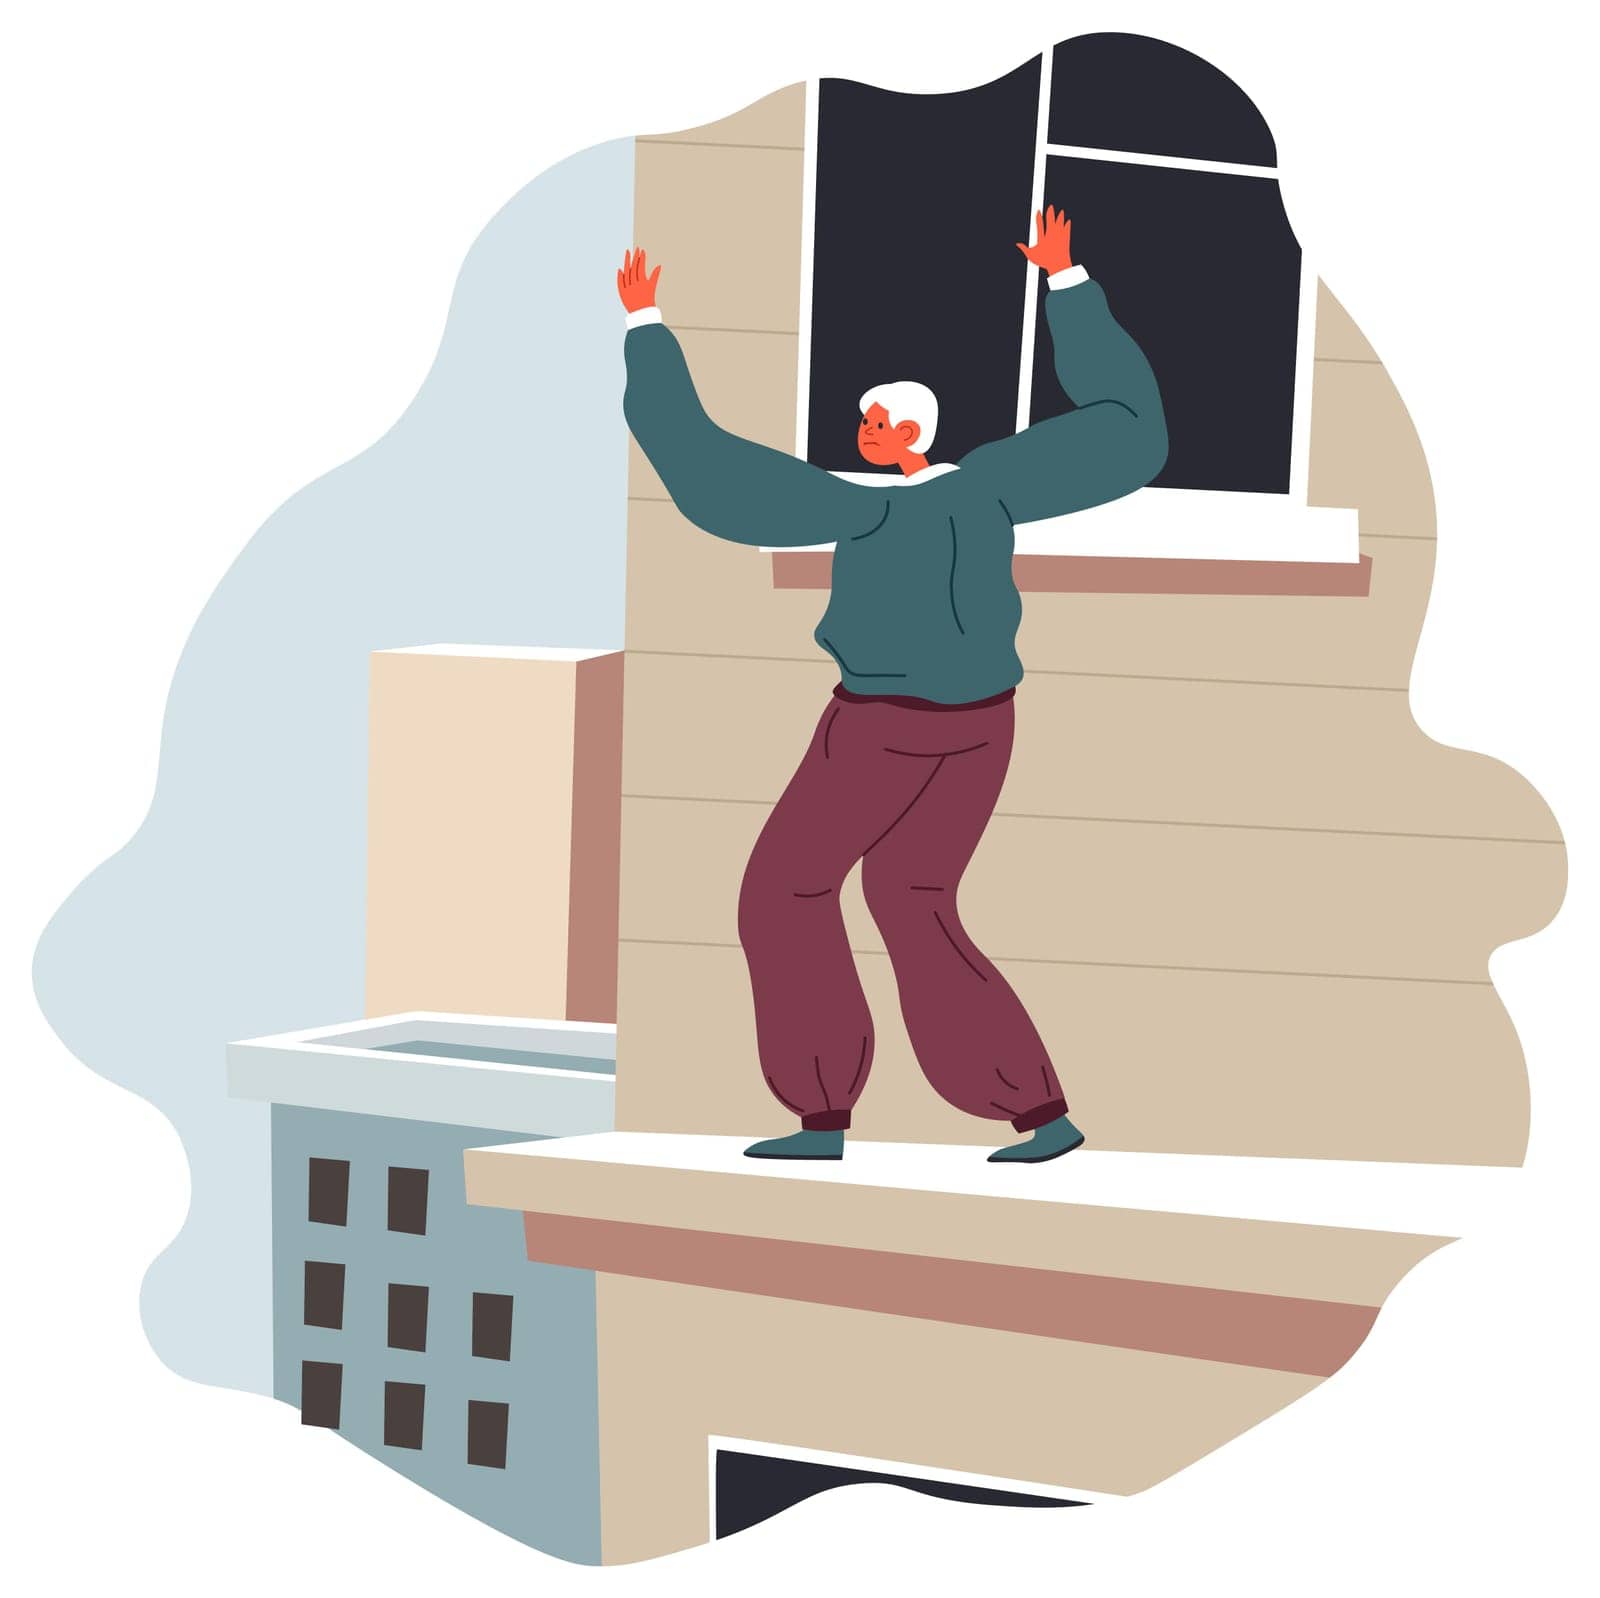 Male character standing on top of building, man afraid of heights. Acrophobia and fear, stress and mental disorder, worried and unable to move. Nervous person. Vector in flat style illustration